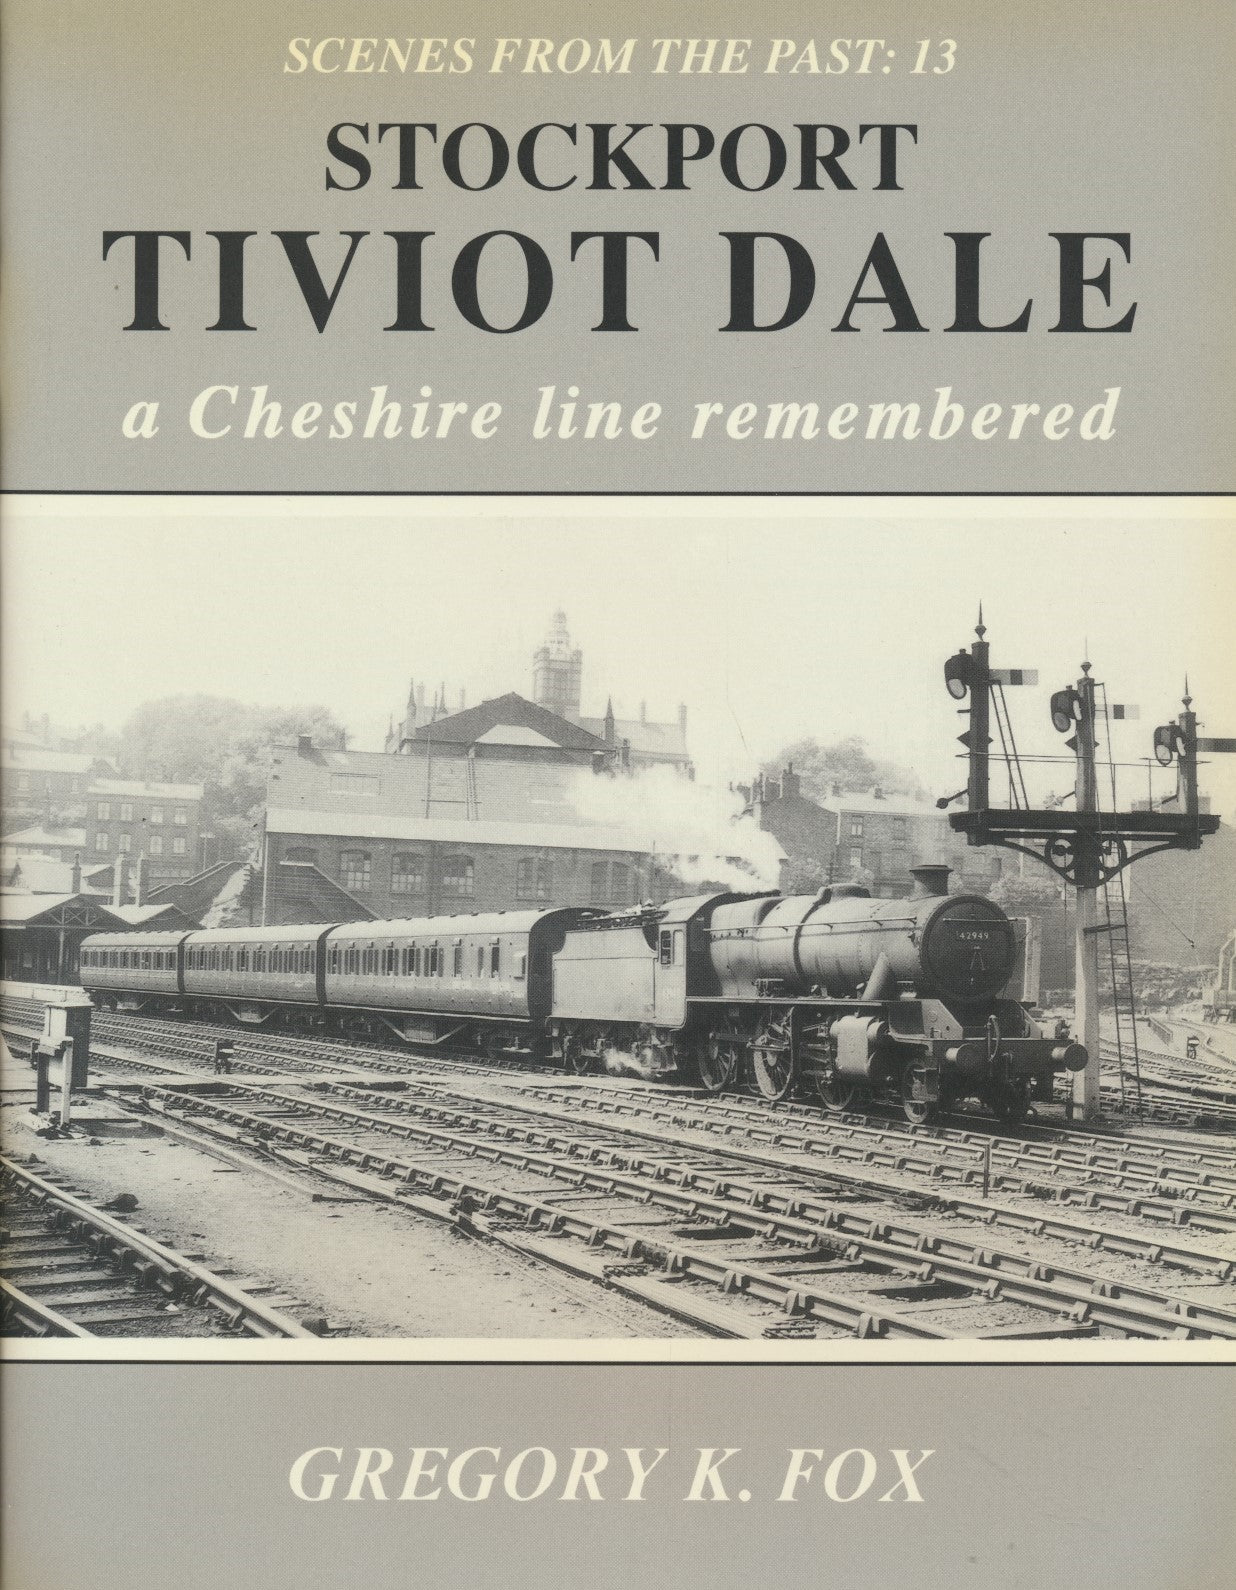 Stockport to Tivot Dale 1991 edition (Scenes From The Past 13)